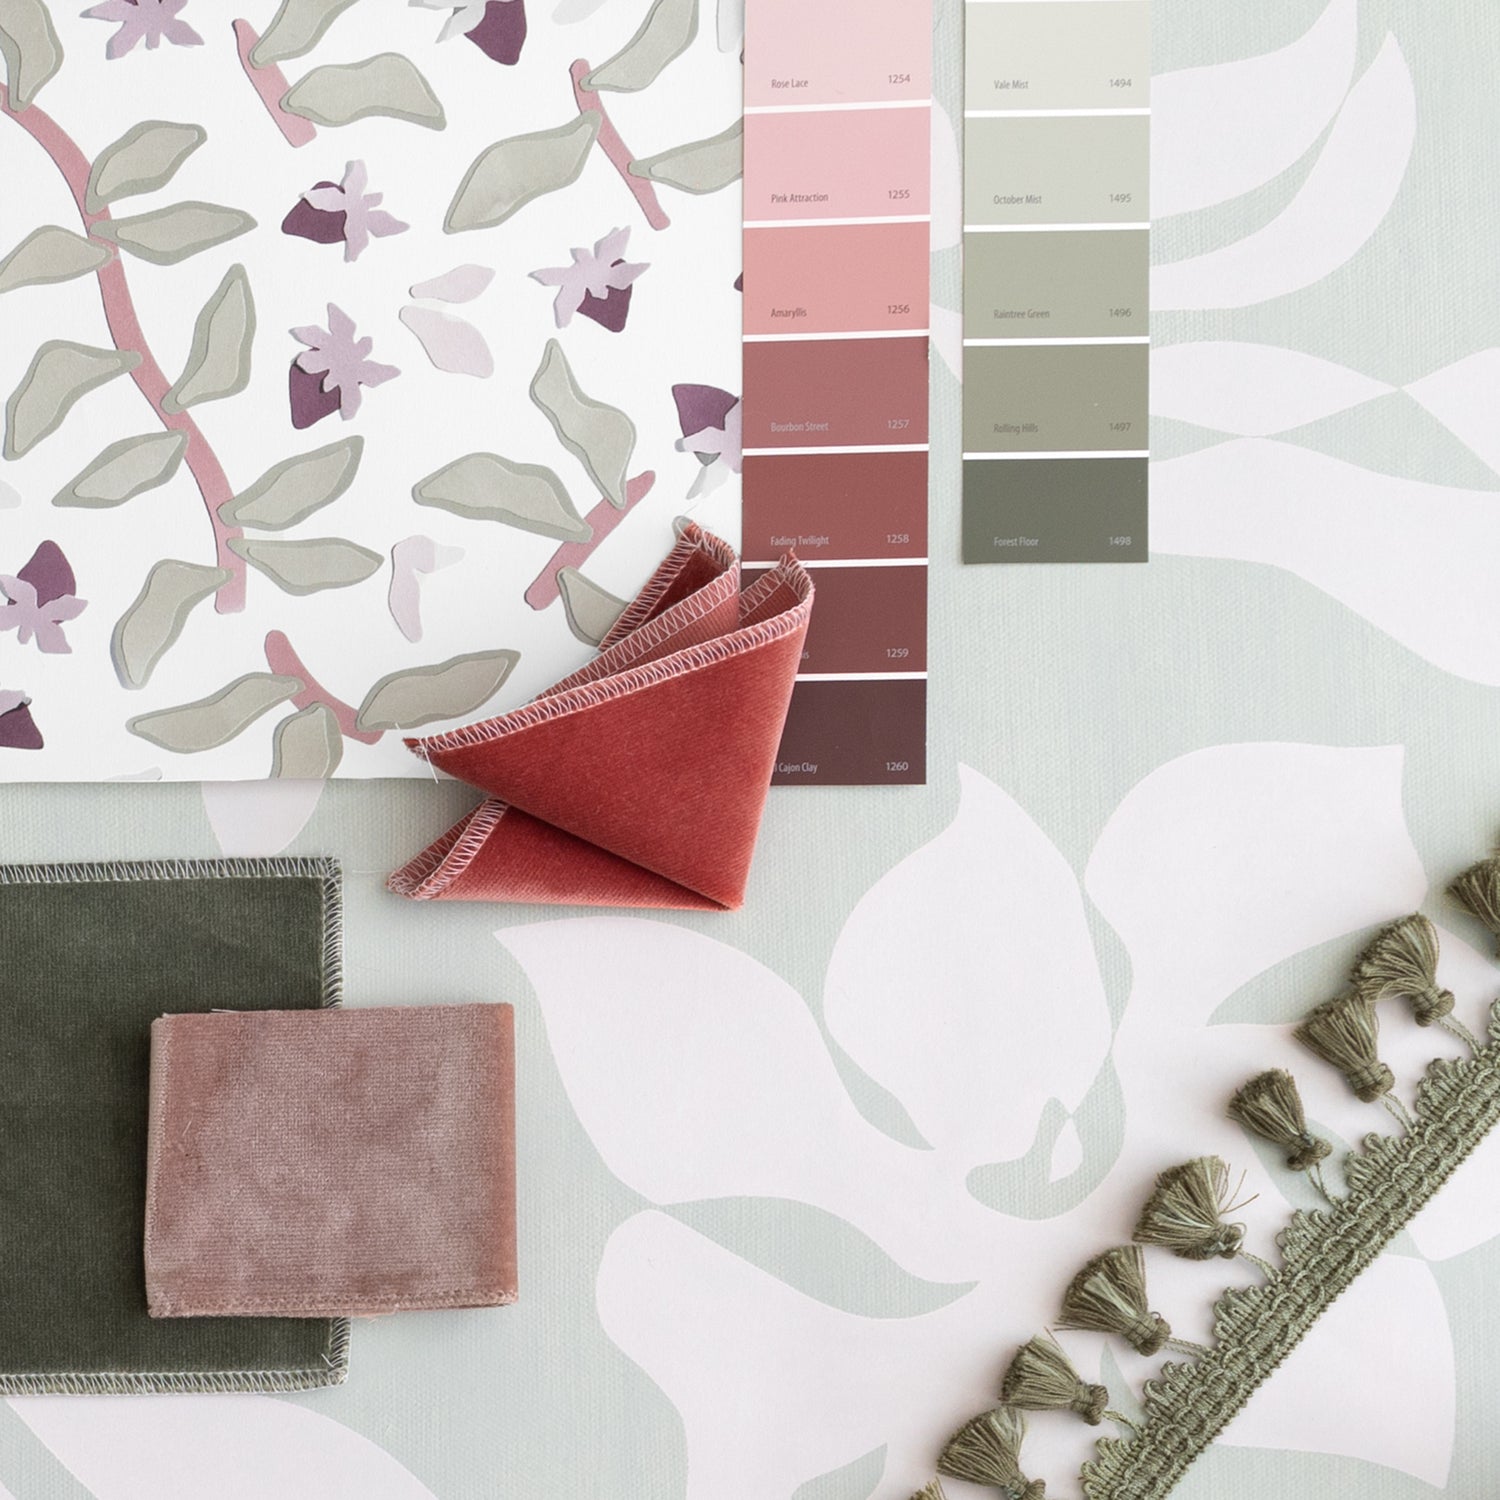 Interior design moodboard and fabric inspirations with Coral Velvet swatch, Mauve Velvet Swatch, Fern Green Velvet Swatch and Strawberry & Botanical Printed Swatch